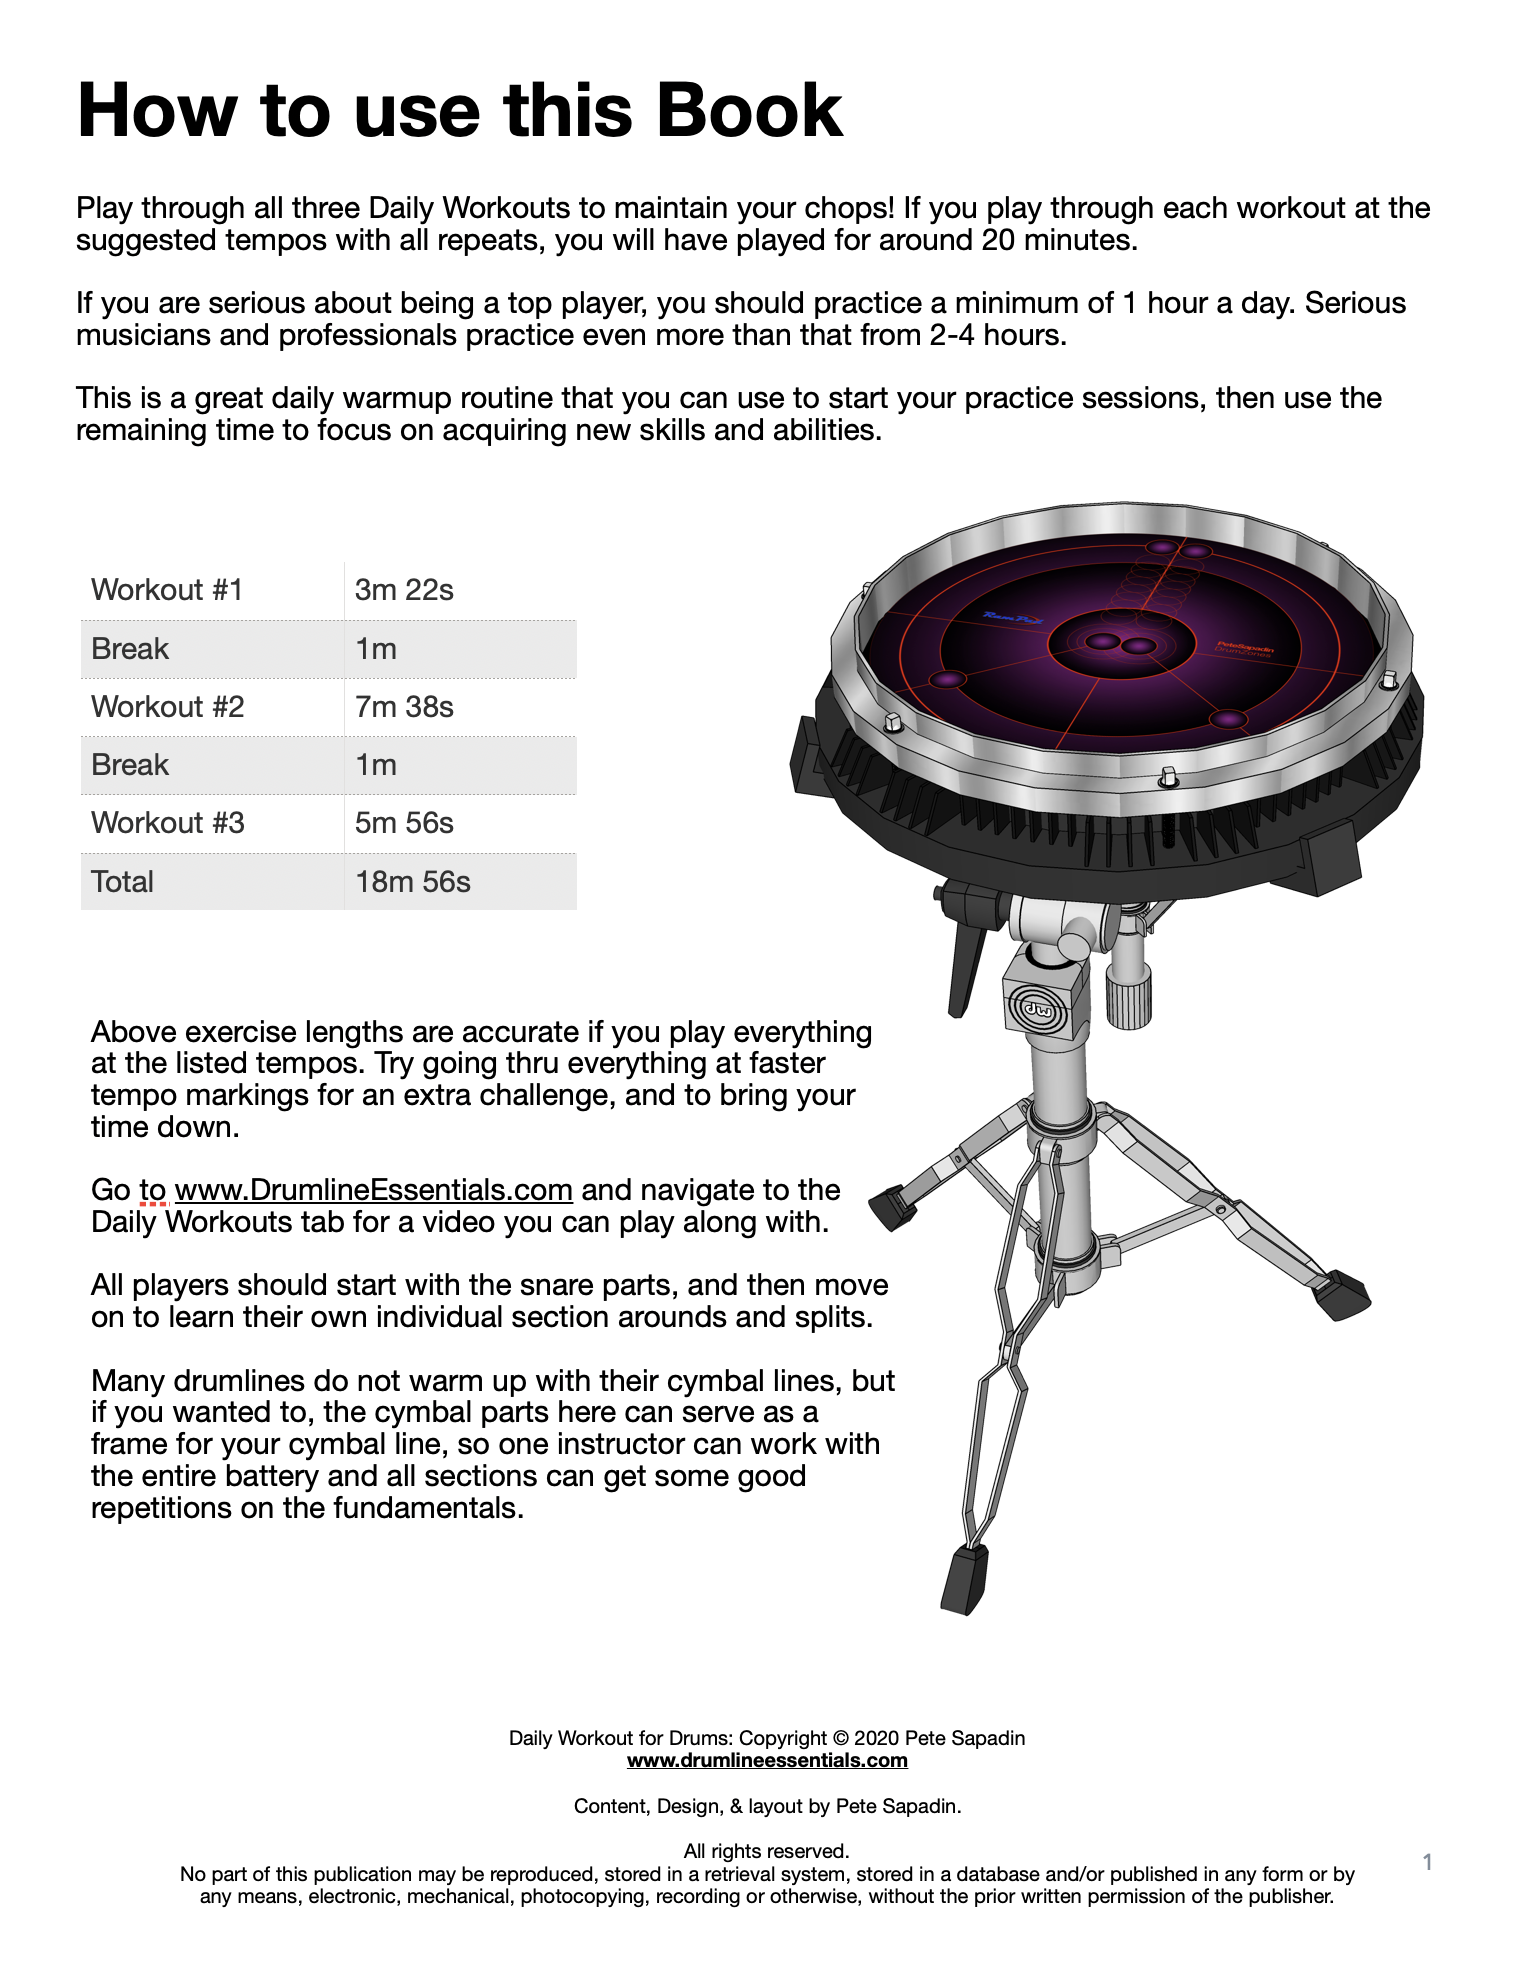 Daily Workout for Drums Book Images - 3.png